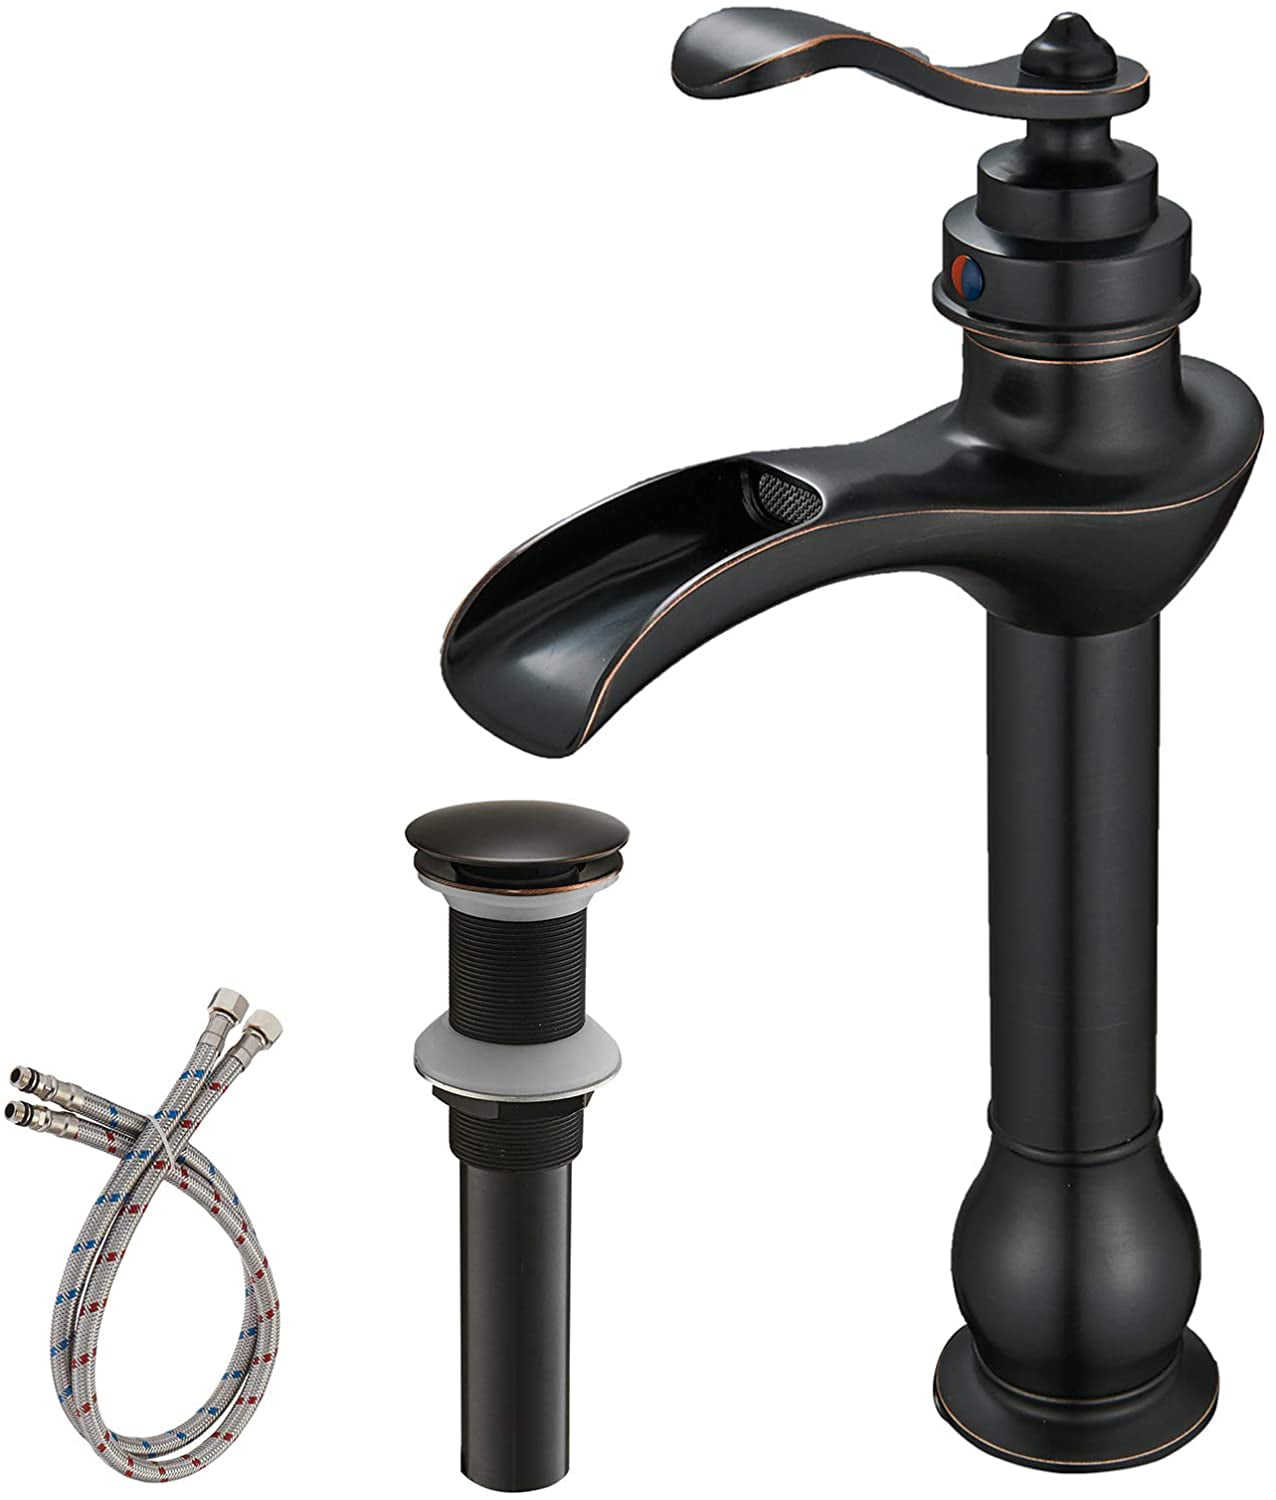 NEW Oil Rubbed Bronze Bath Waterfall  Vessel Basin Sink Taps Mixer Faucets 